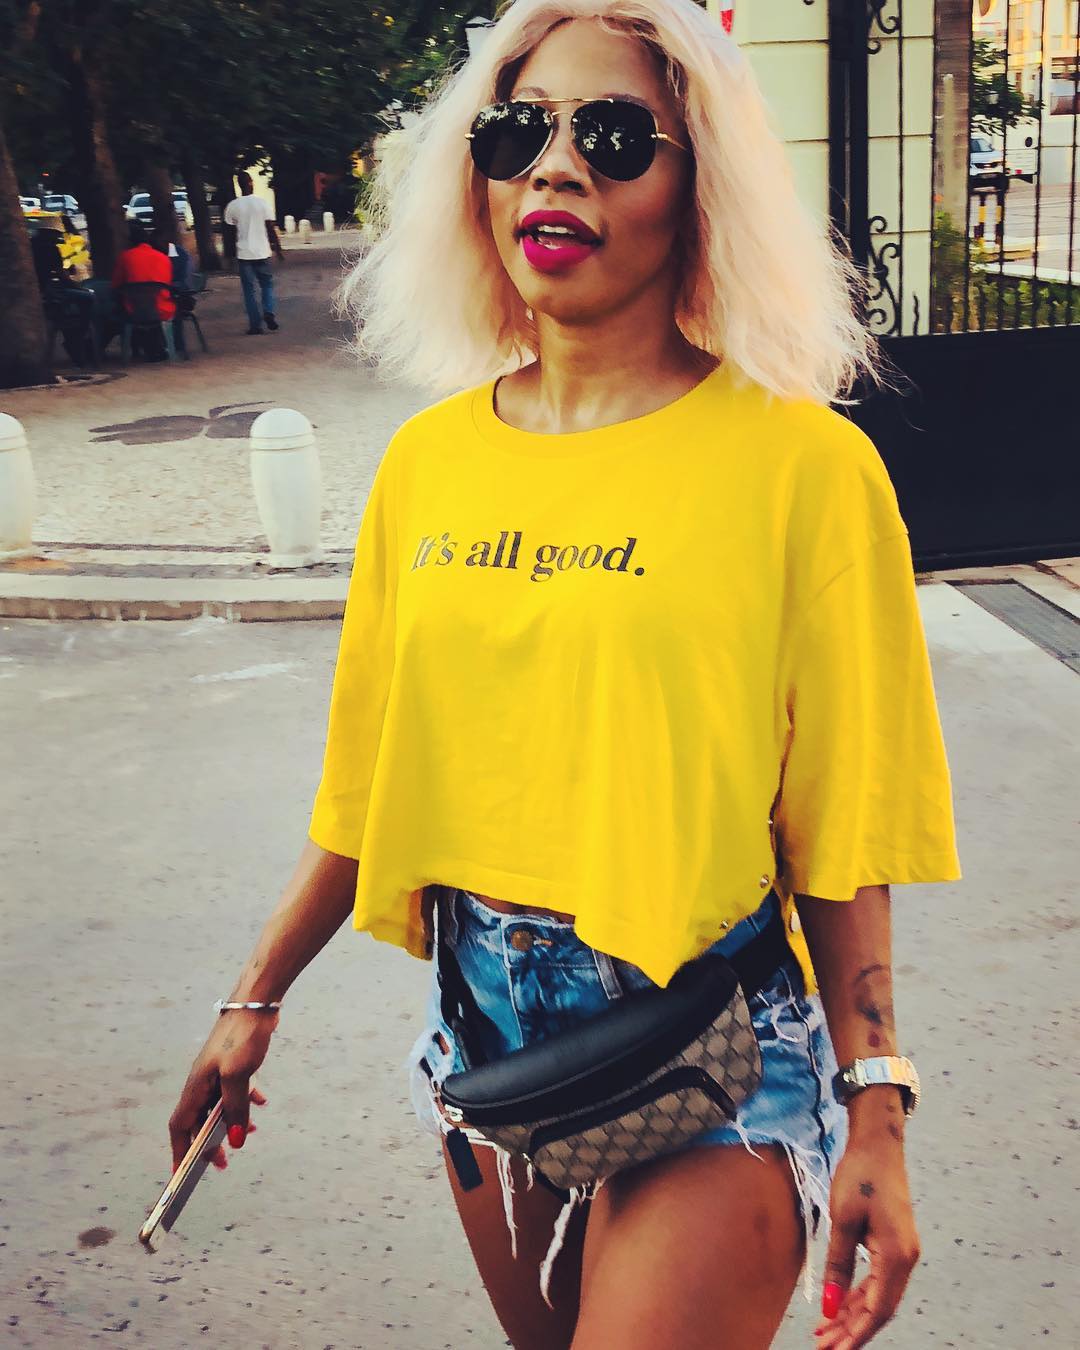 Kelly Khumalo in Mozambique